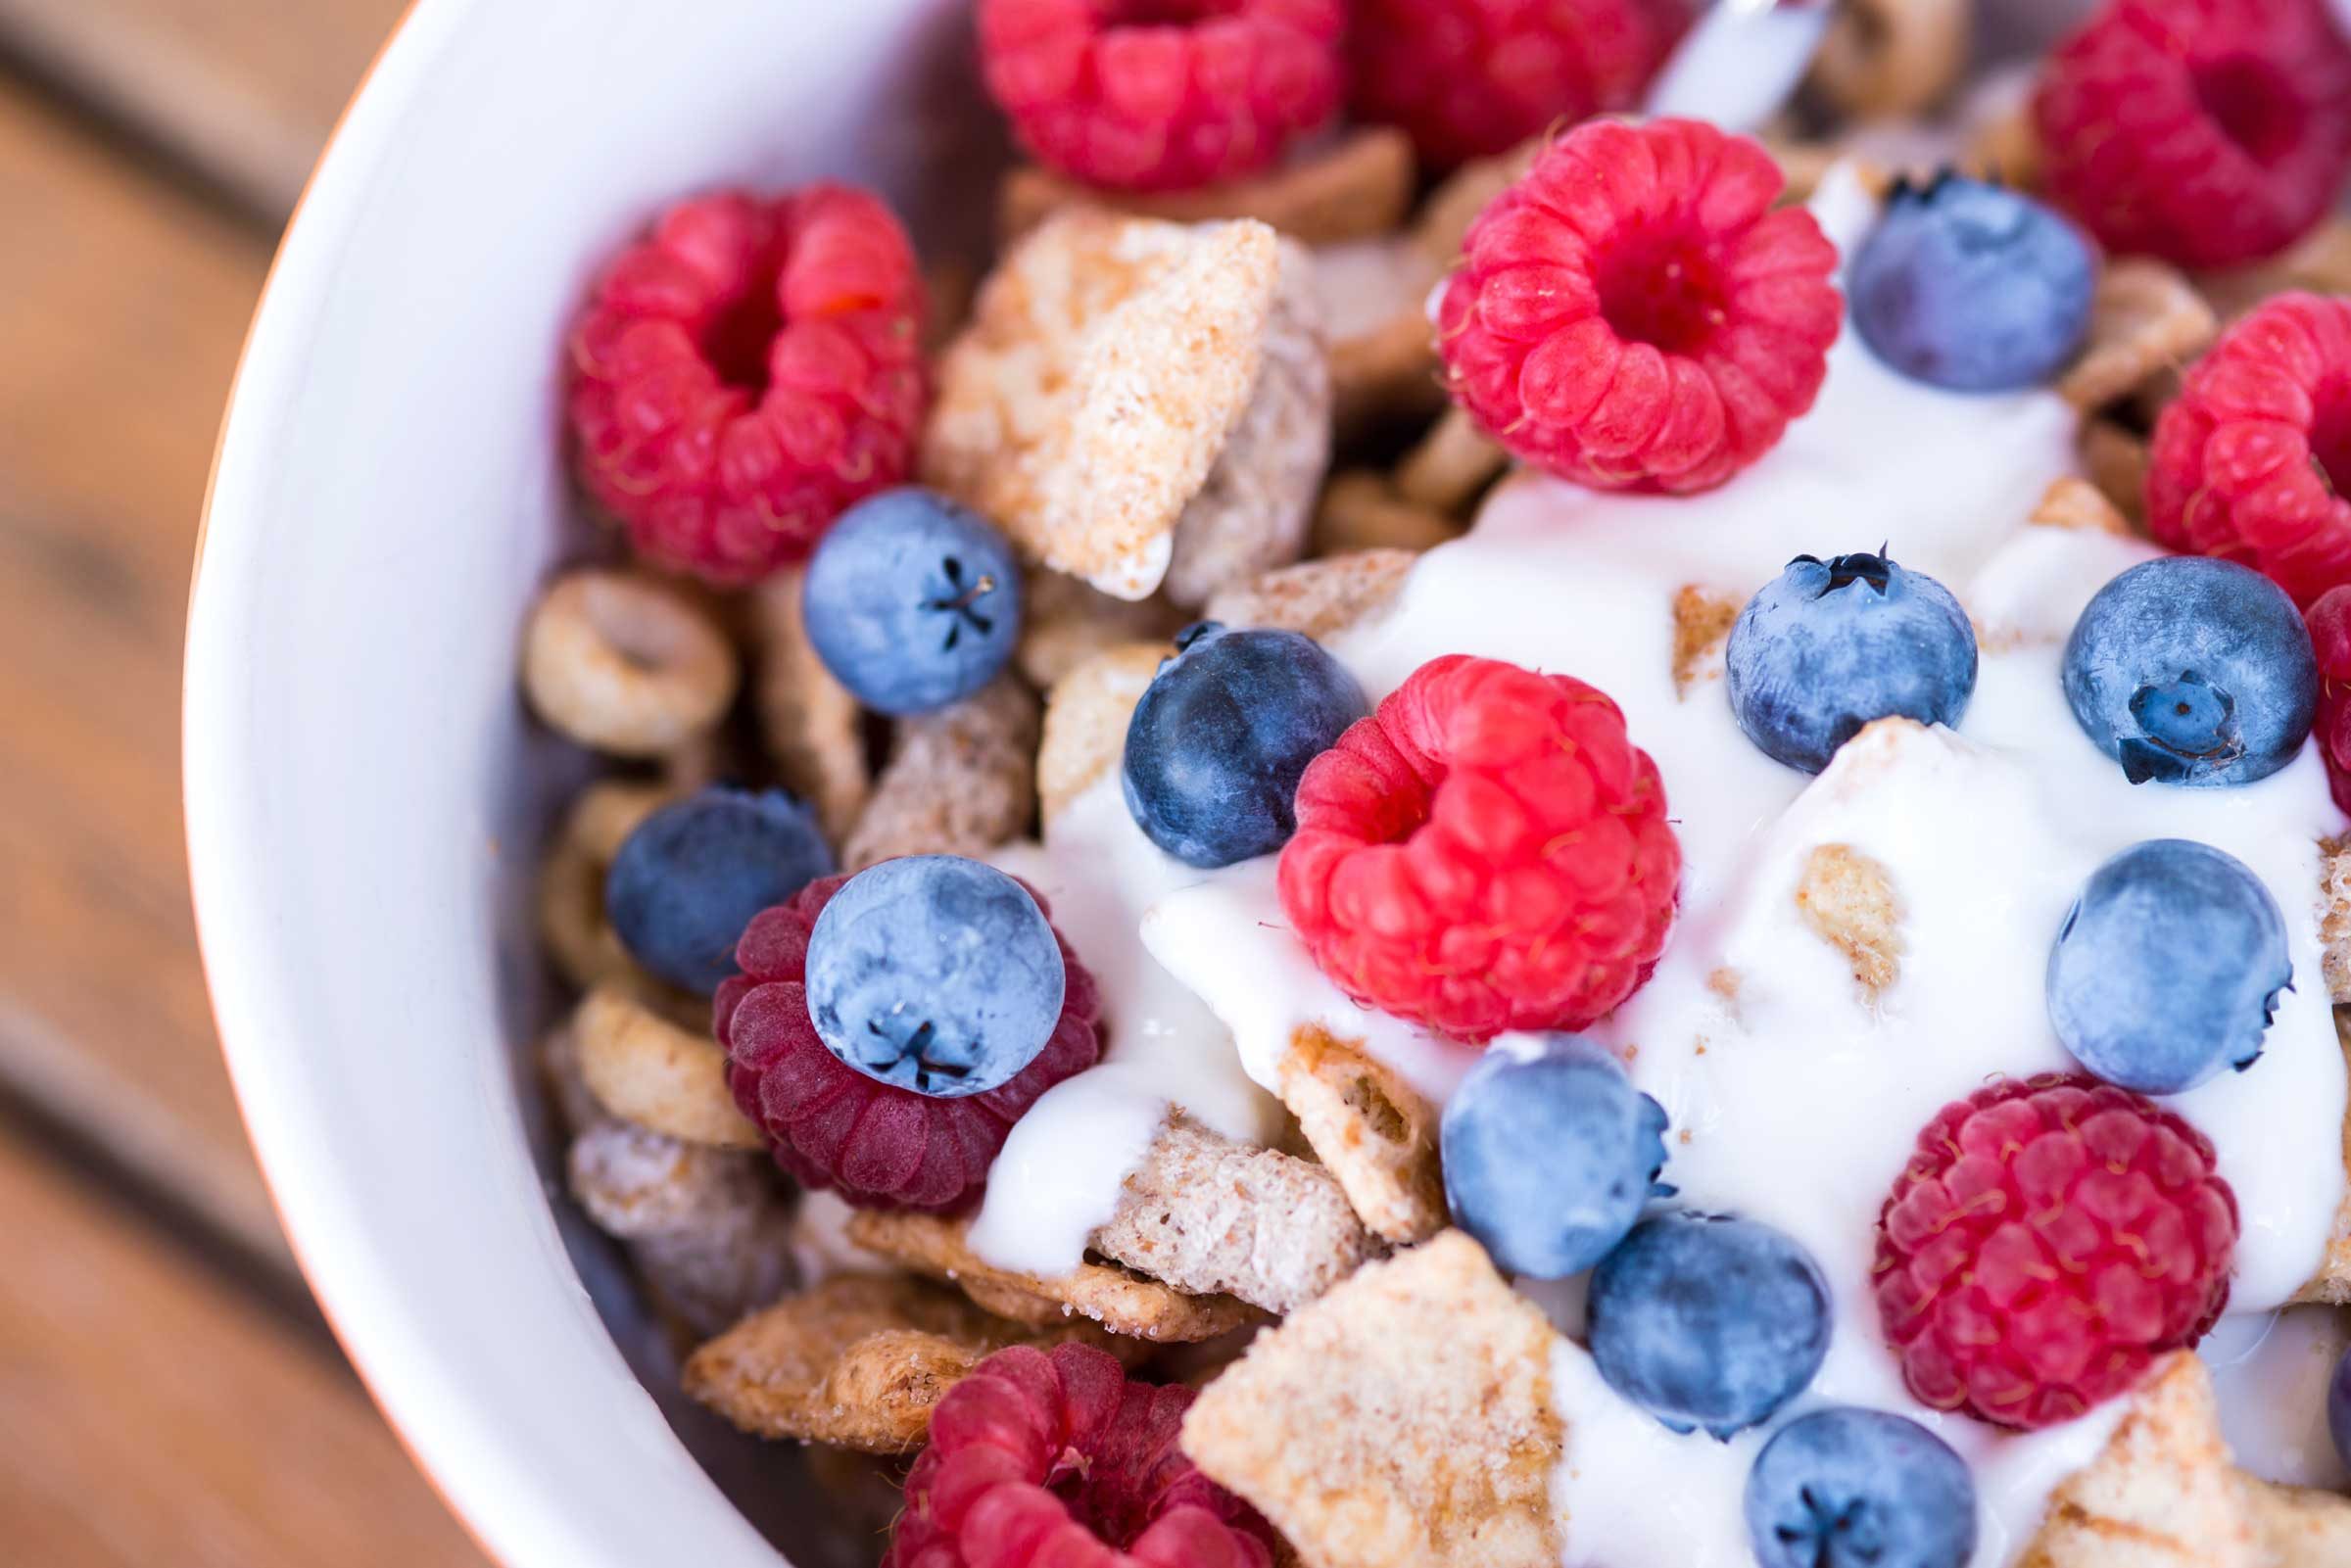 30 Healthy Eating Tips That Might Just Change Your Life